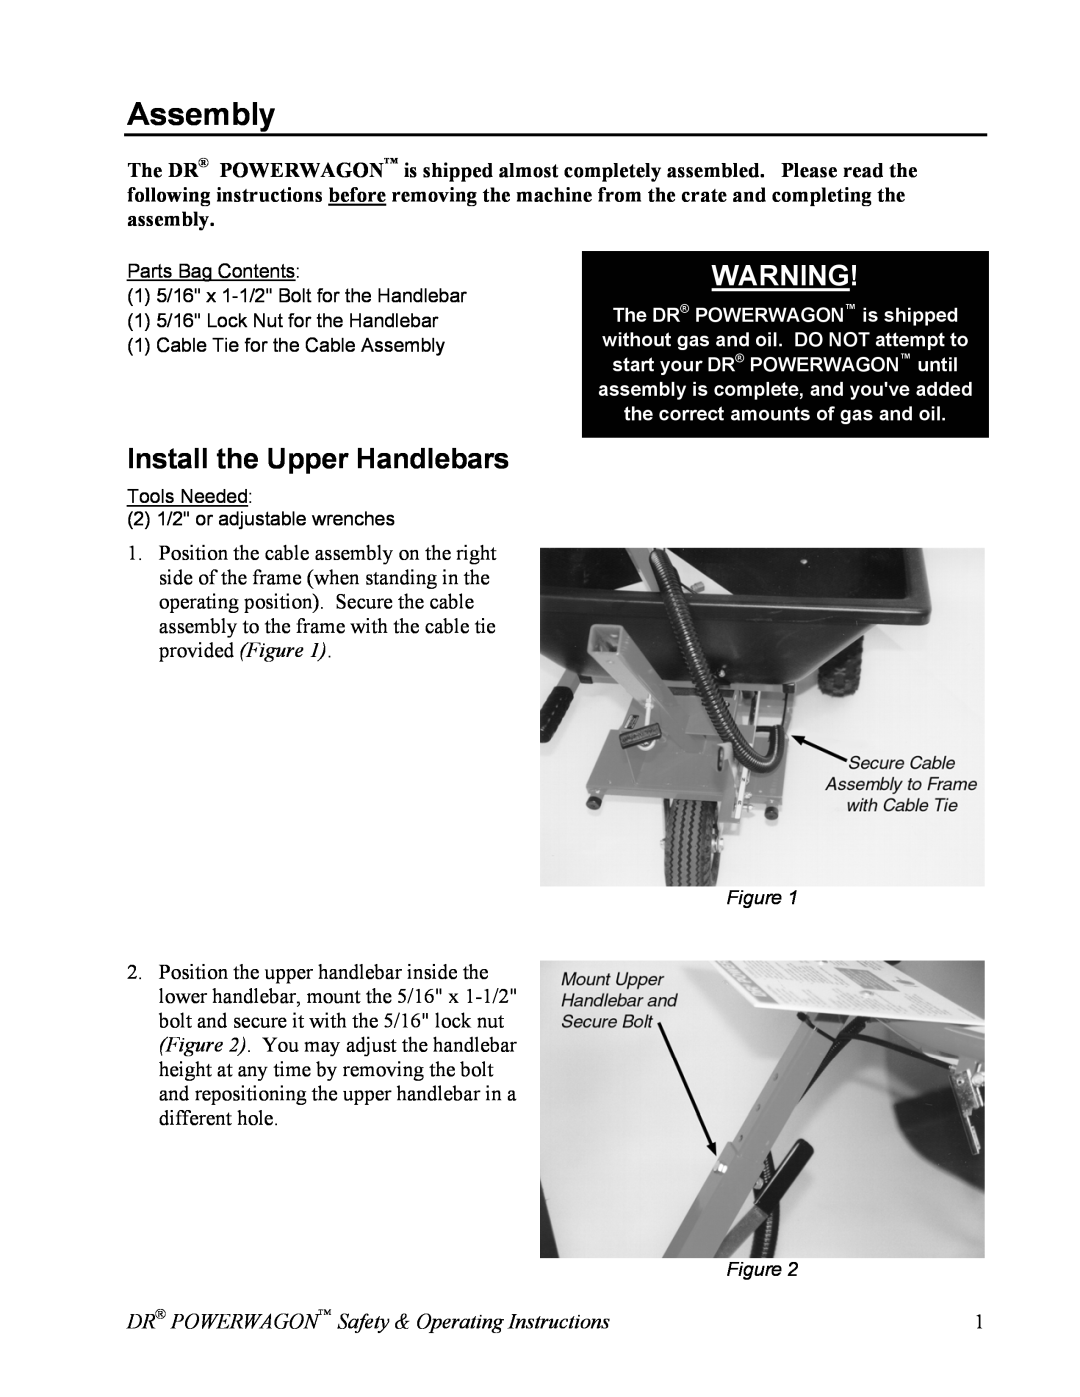 Country Home Products SUBURBANTM Assembly, Install the Upper Handlebars, DR POWERWAGON Safety & Operating Instructions 